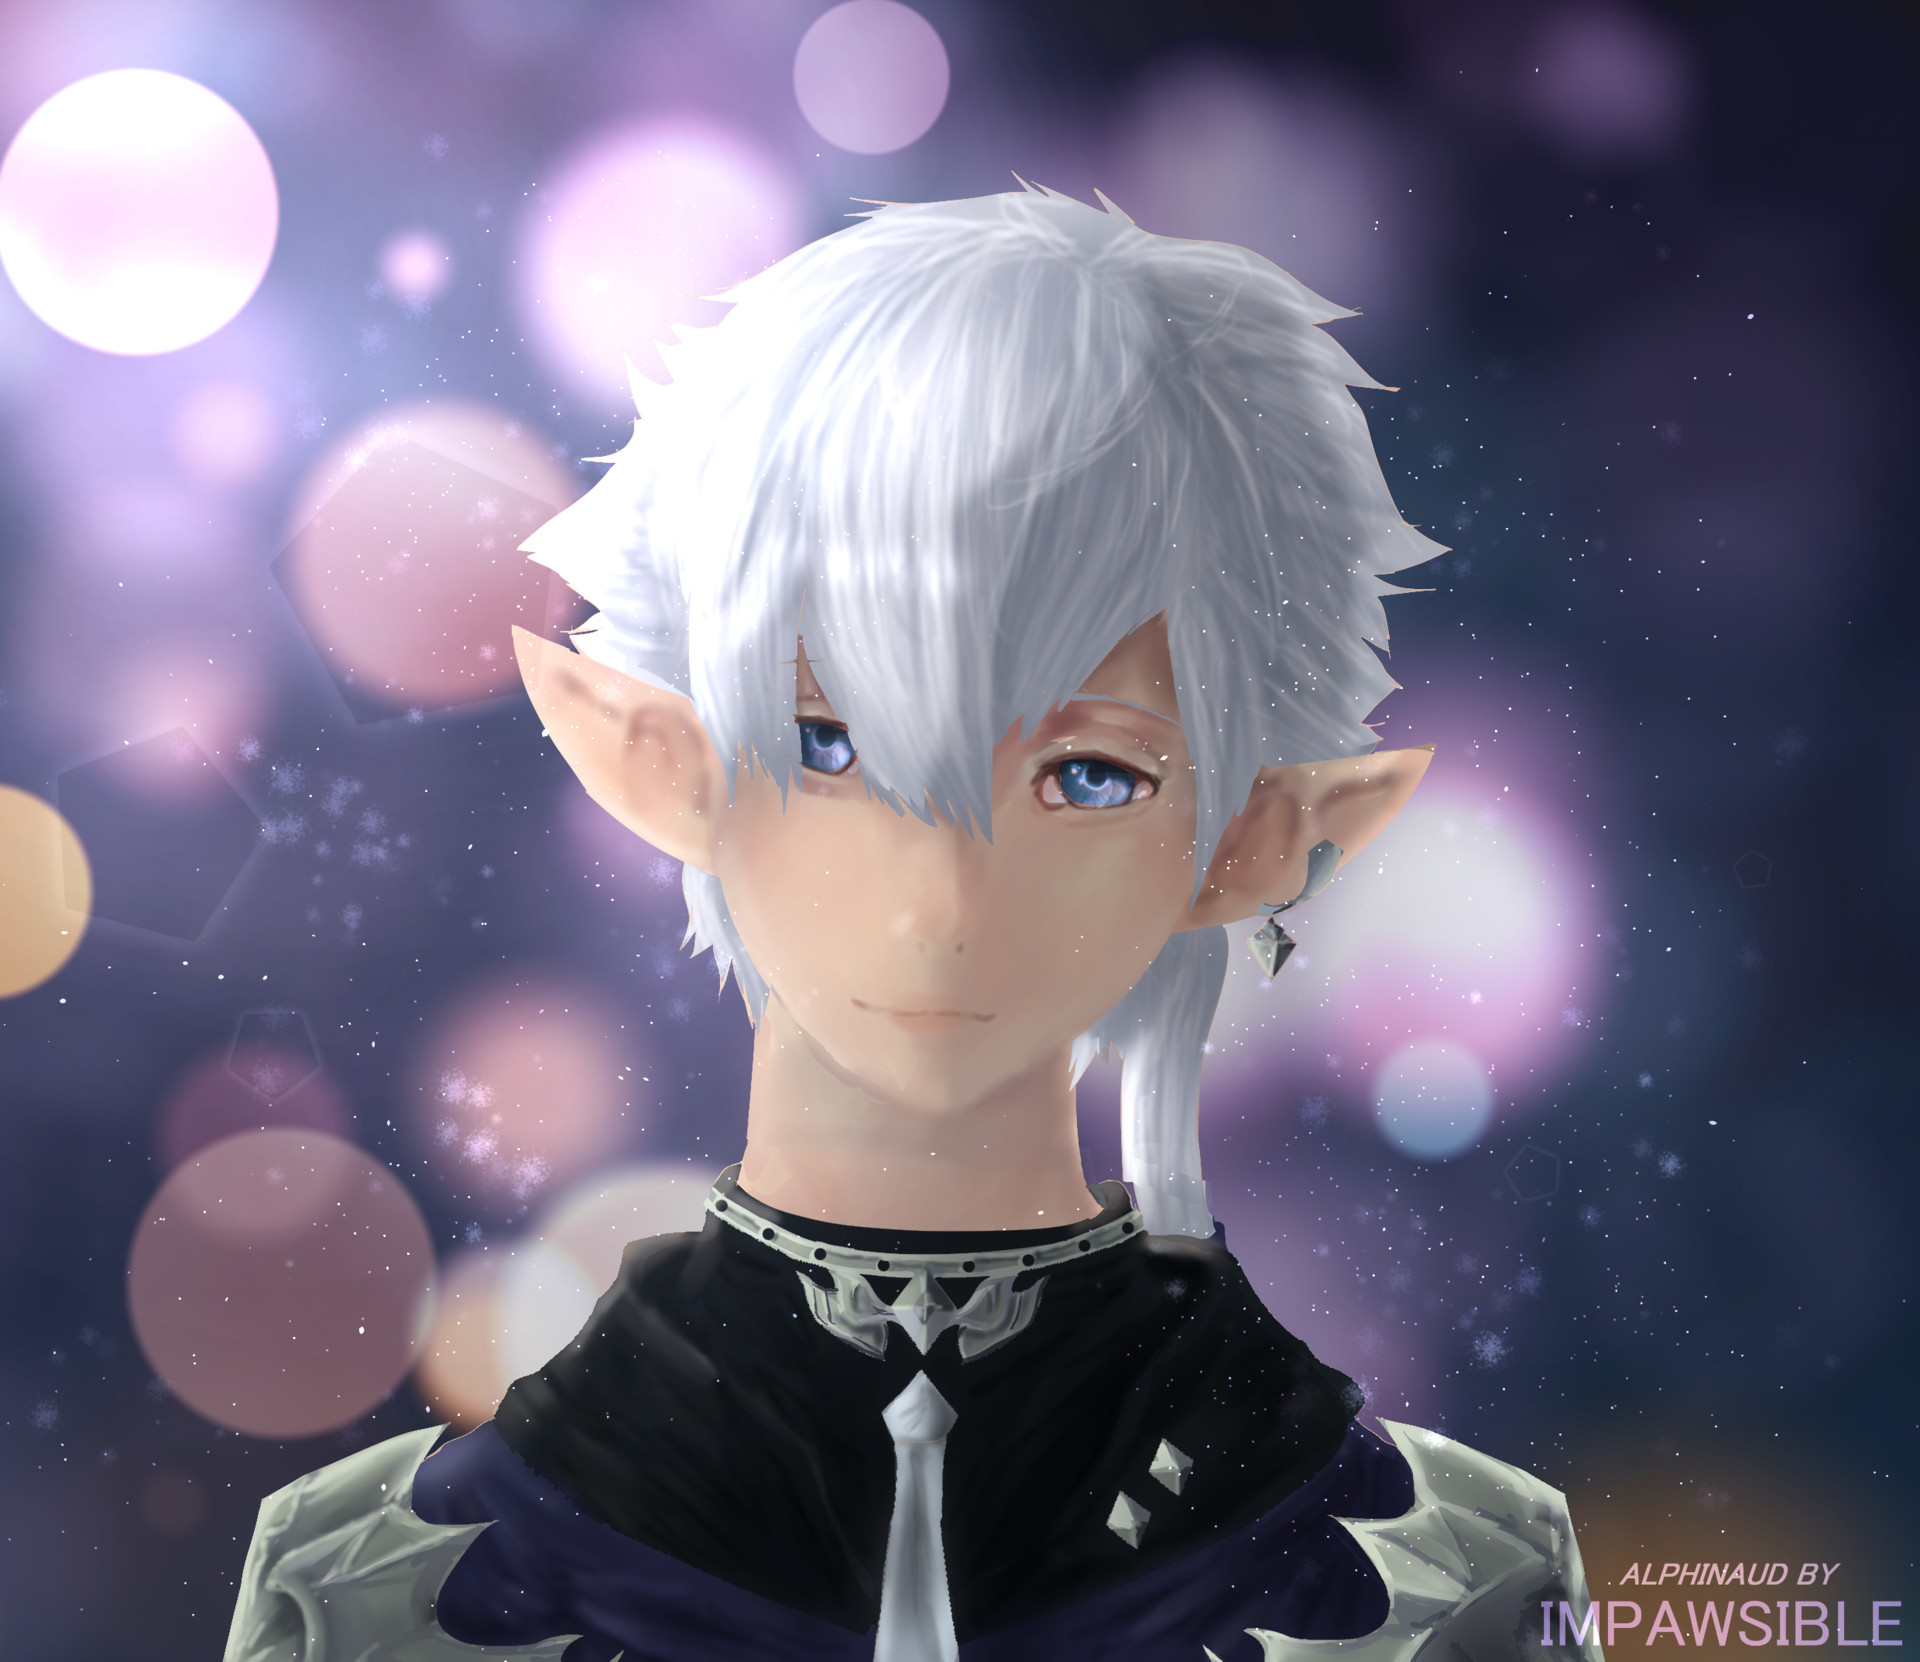 Alphinaud from FFXIV! 